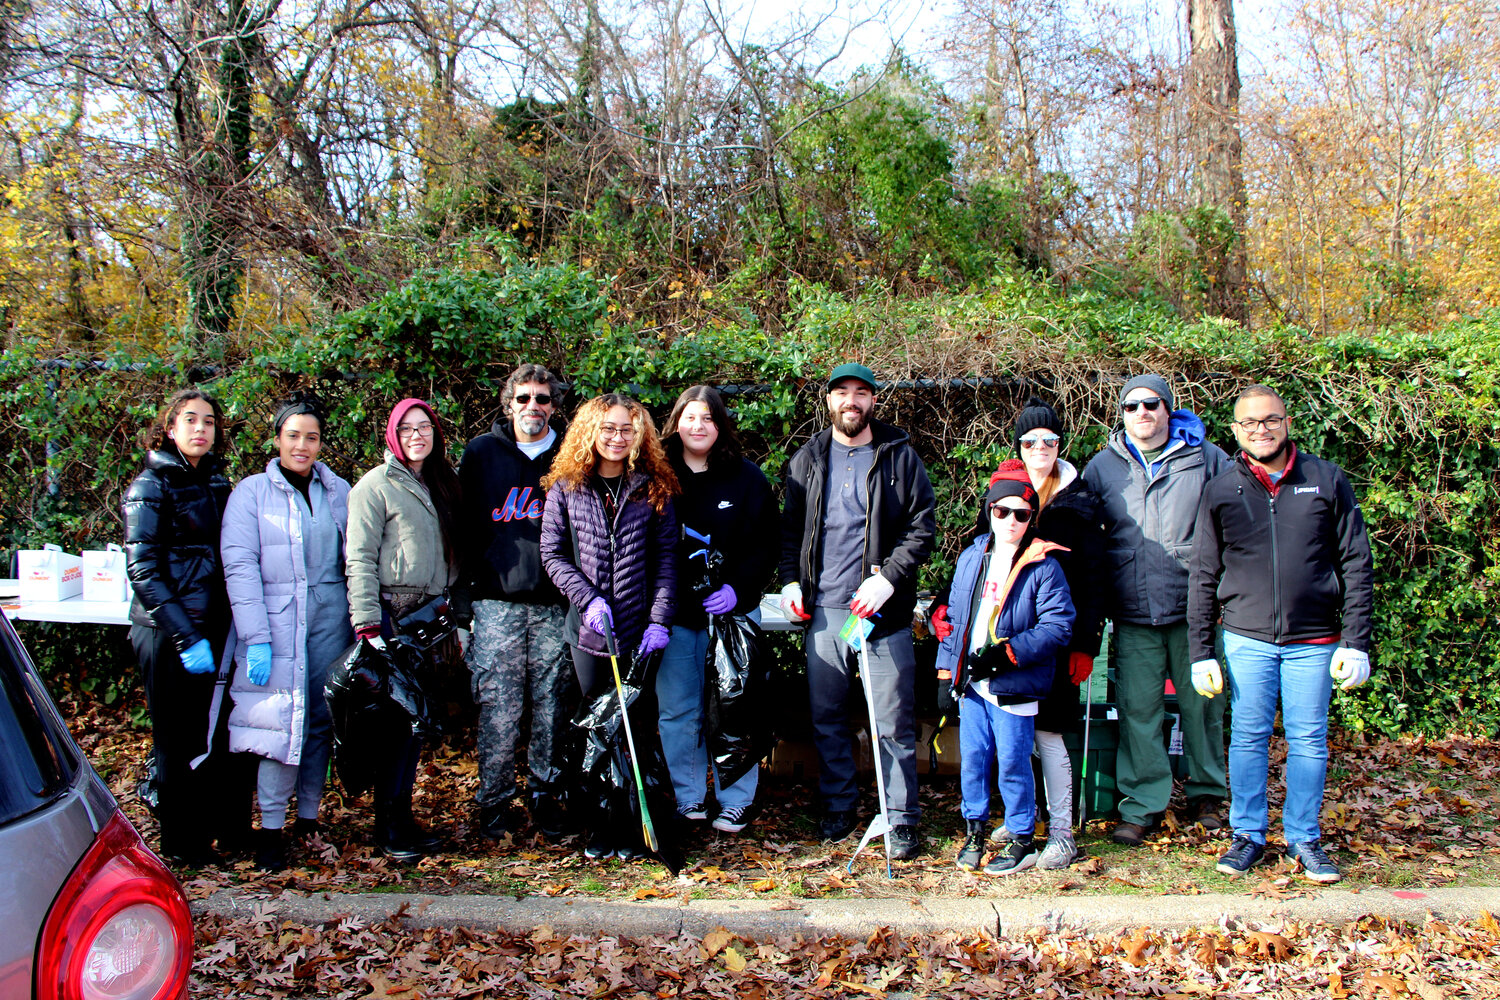 Volunteers gathered at the Freeport Brookside Preserve to collect litter in this annual event.